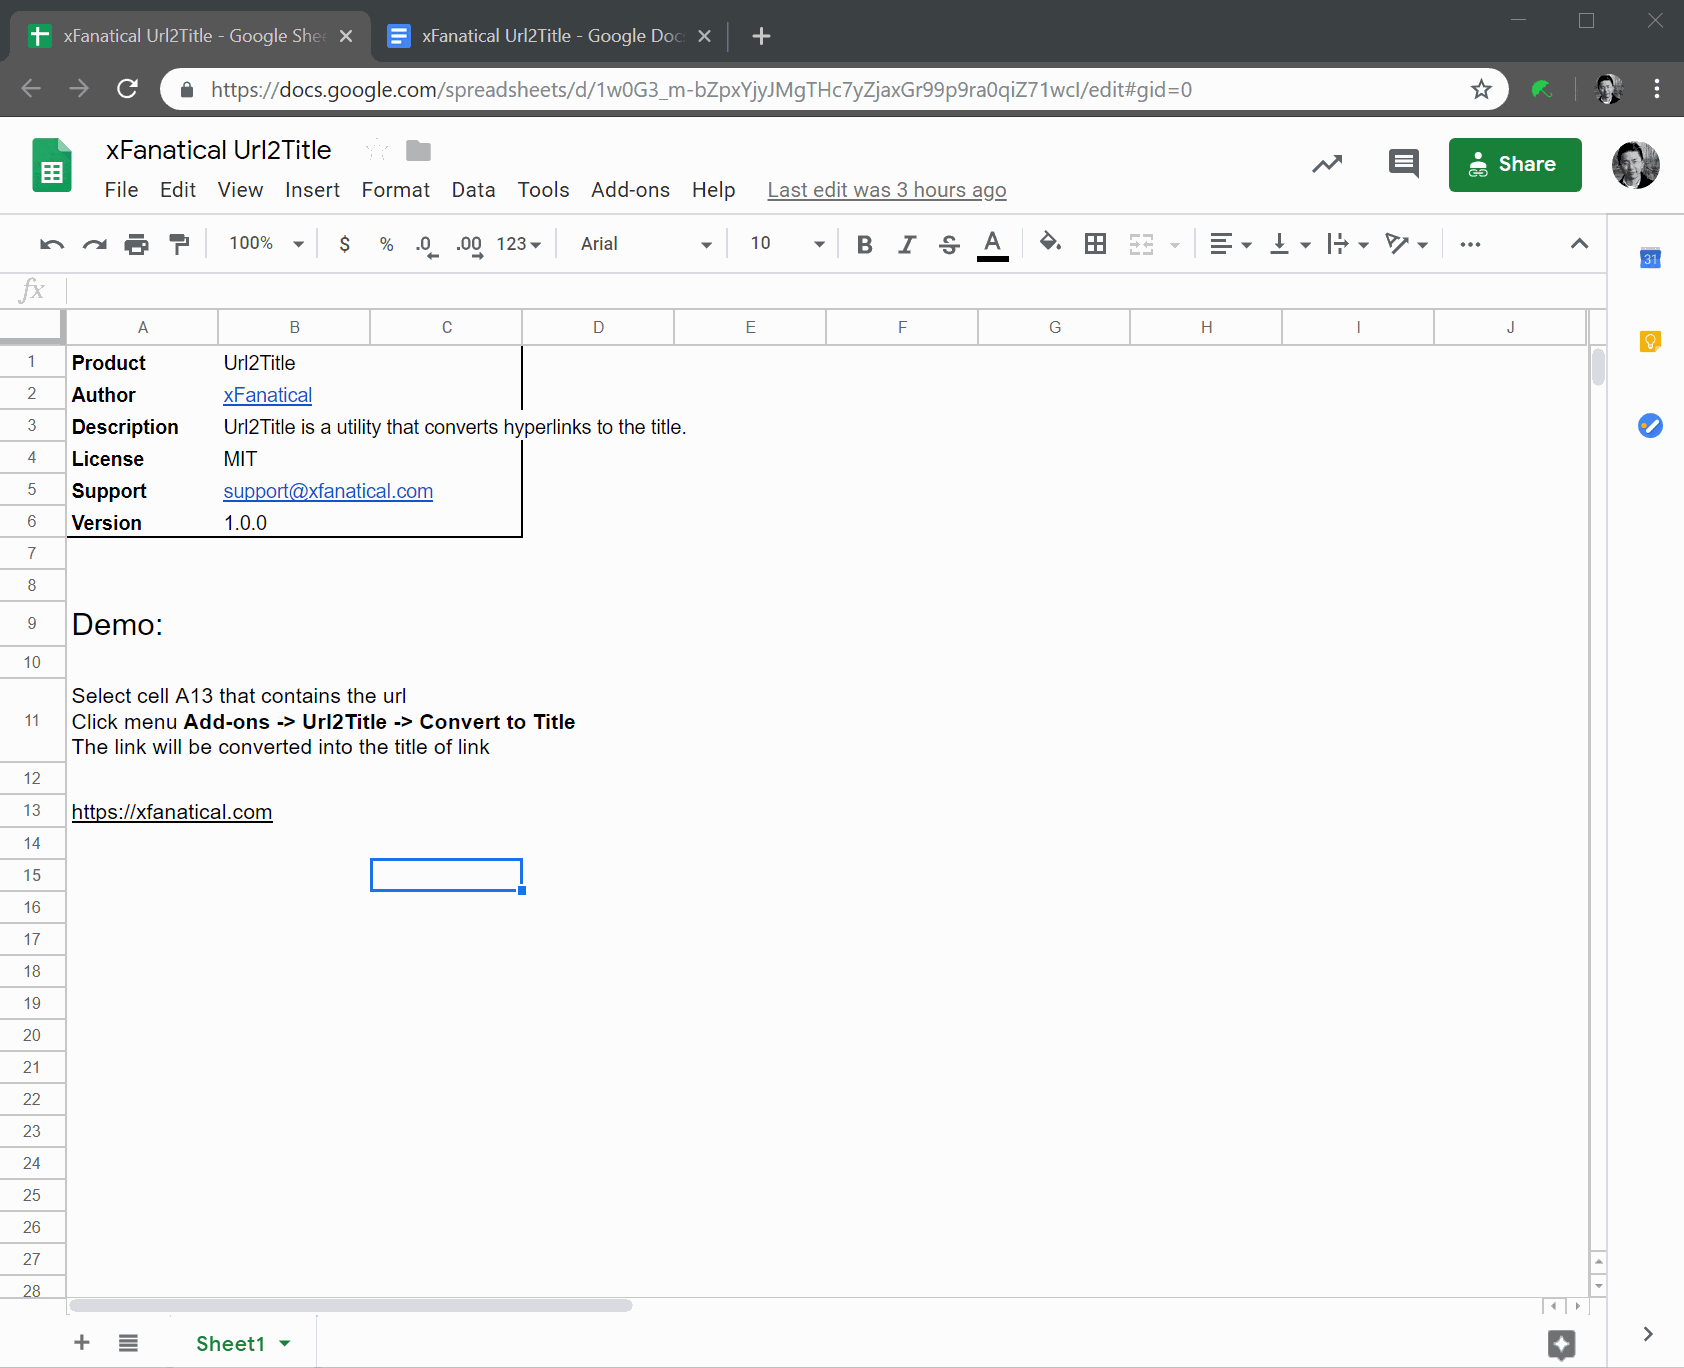 Demonstration of getting the page title to a link in google sheets using url2title